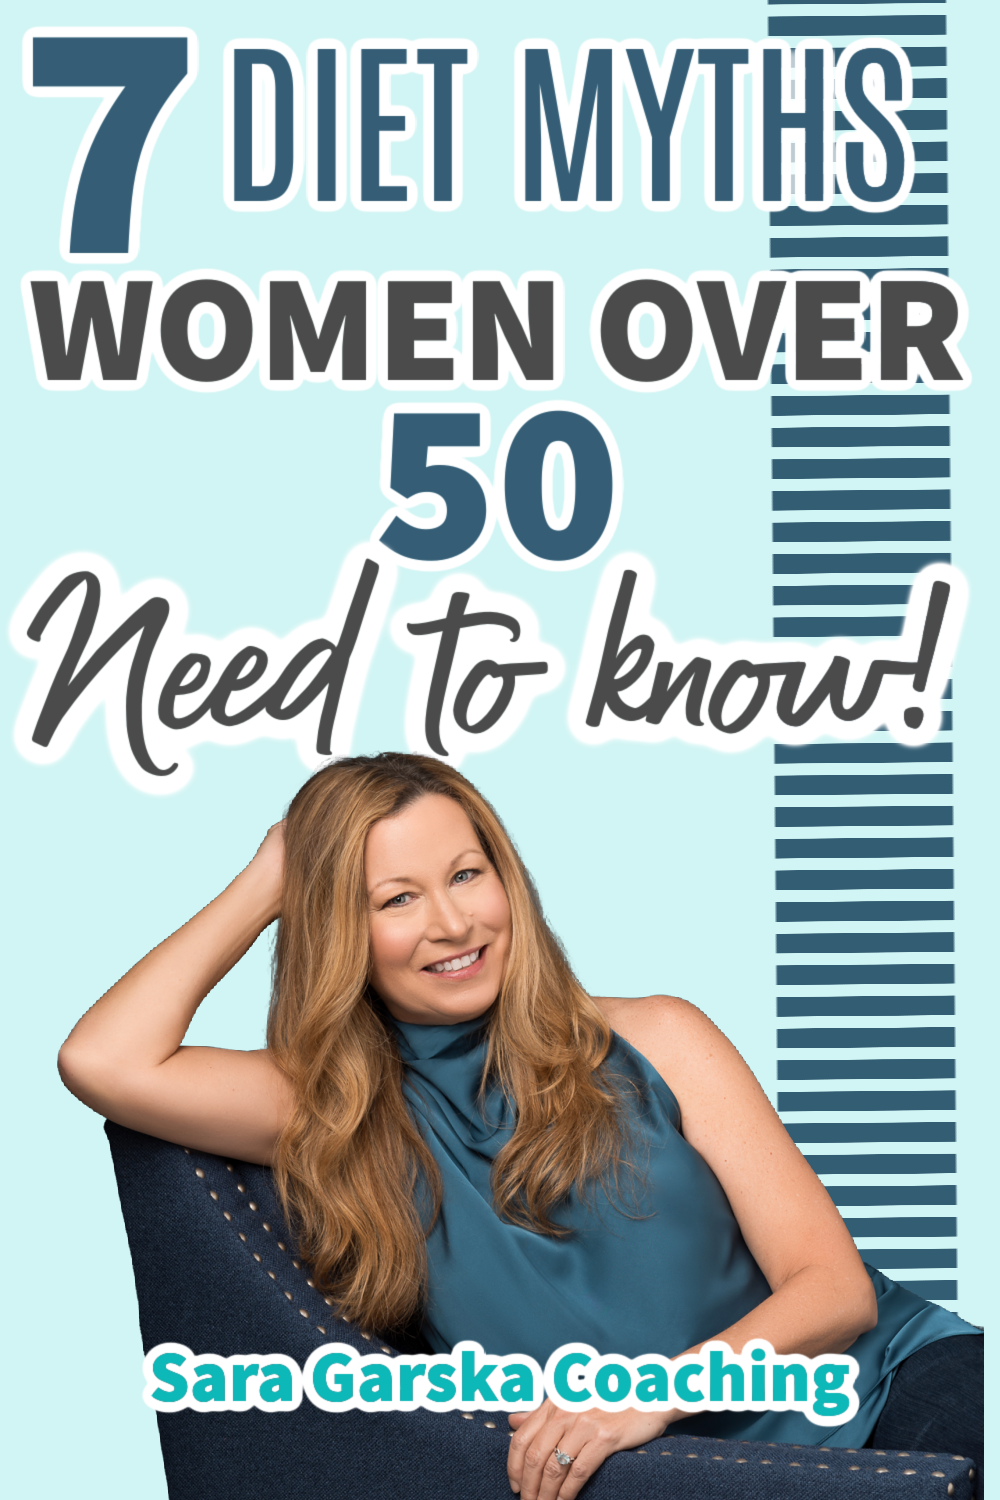 Picture of life coach Sara Garska with words: 7 diet myths women over 50 need to know